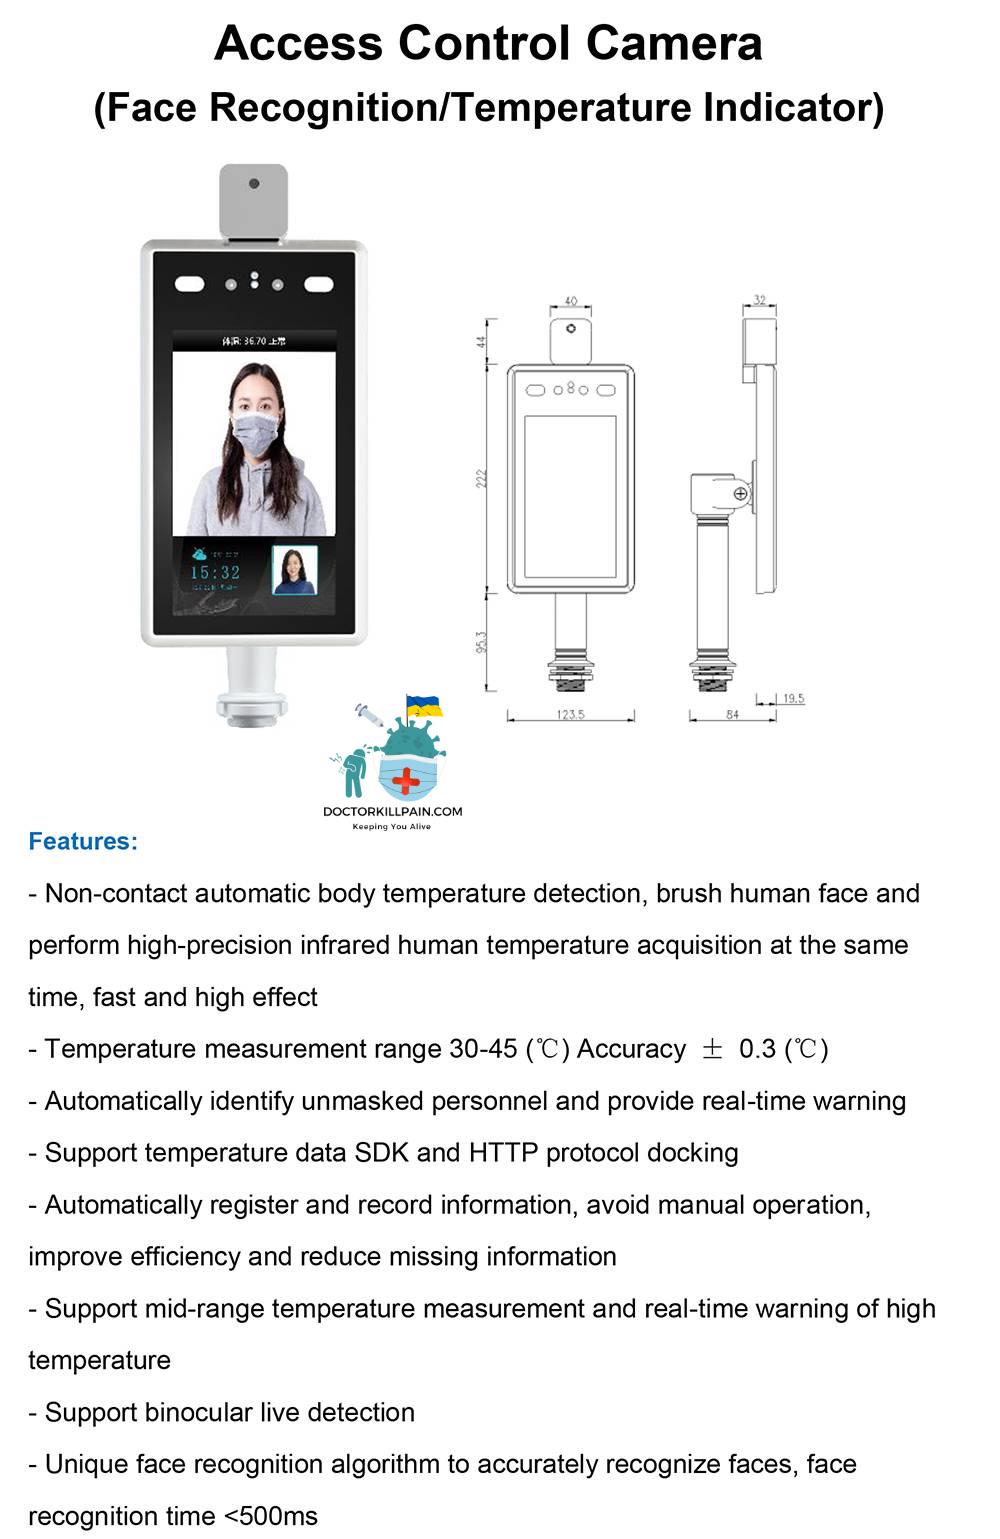 7inch Body Temperature Facial Recognition Camera ip thermal security camera thermal Human Detect Access Control Face Recognize